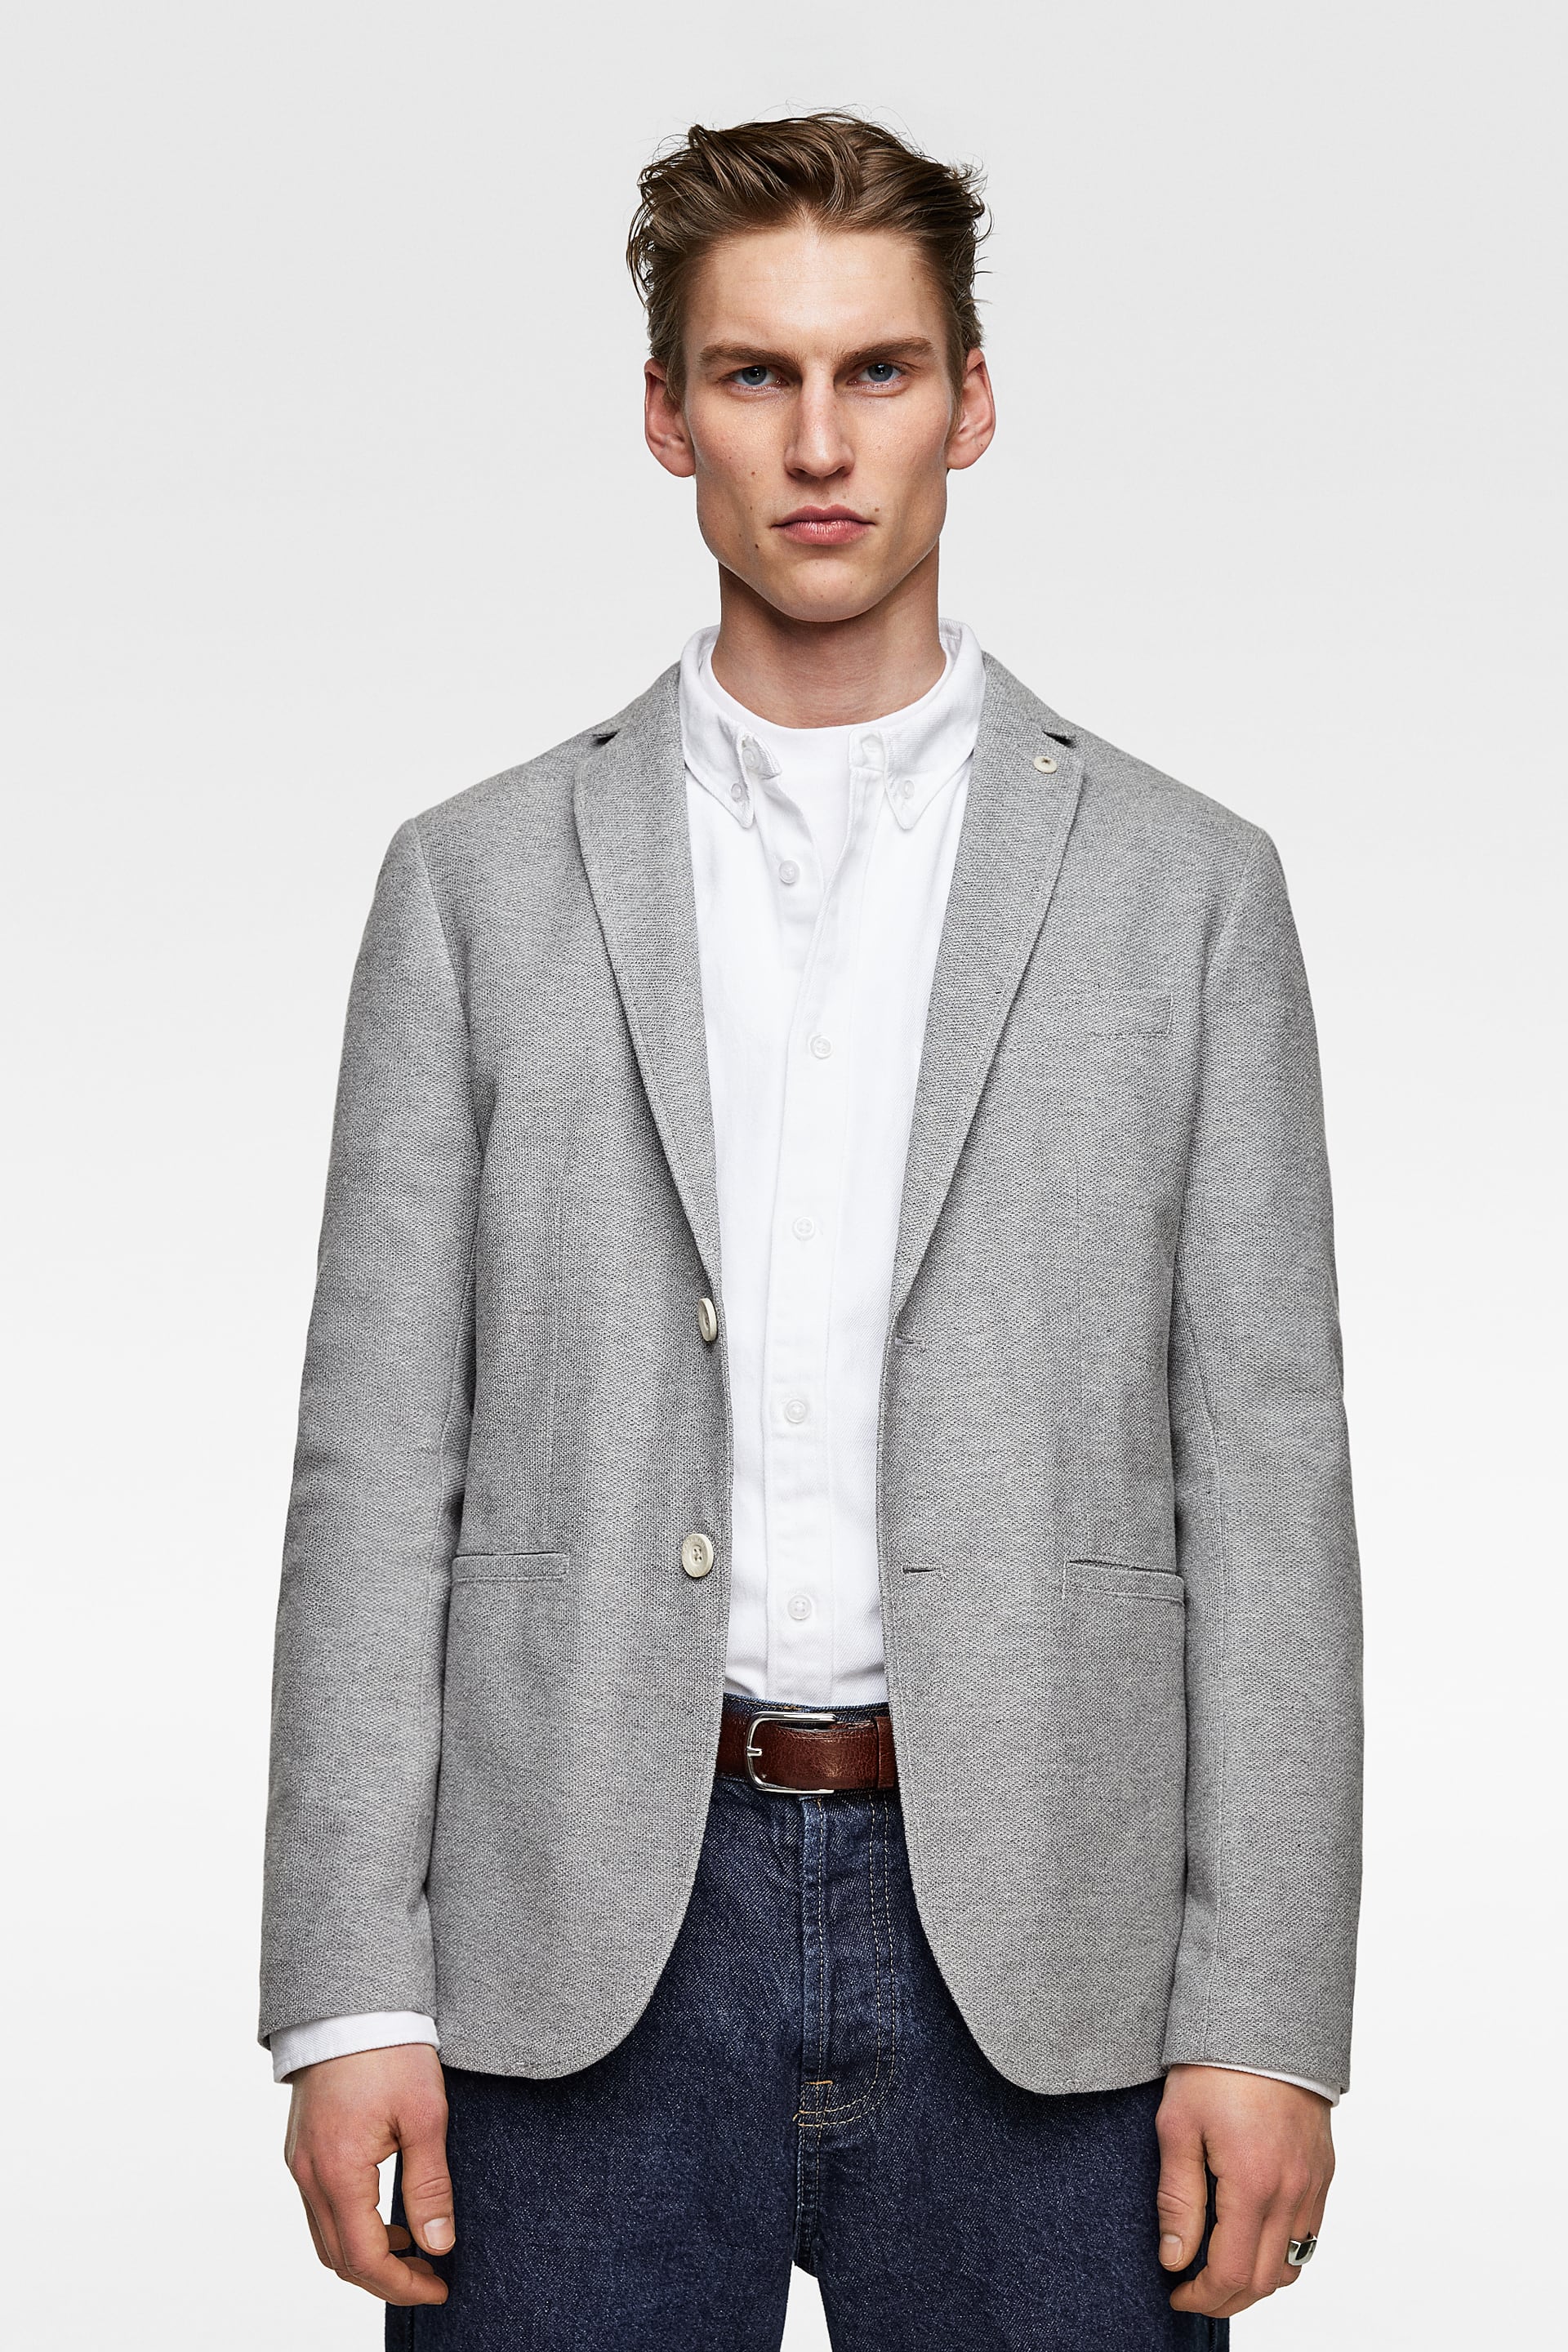 Men's outfit inspiration photo shoot STRUCTURED BLAZER WITH ELBOW PATCHES from Zara